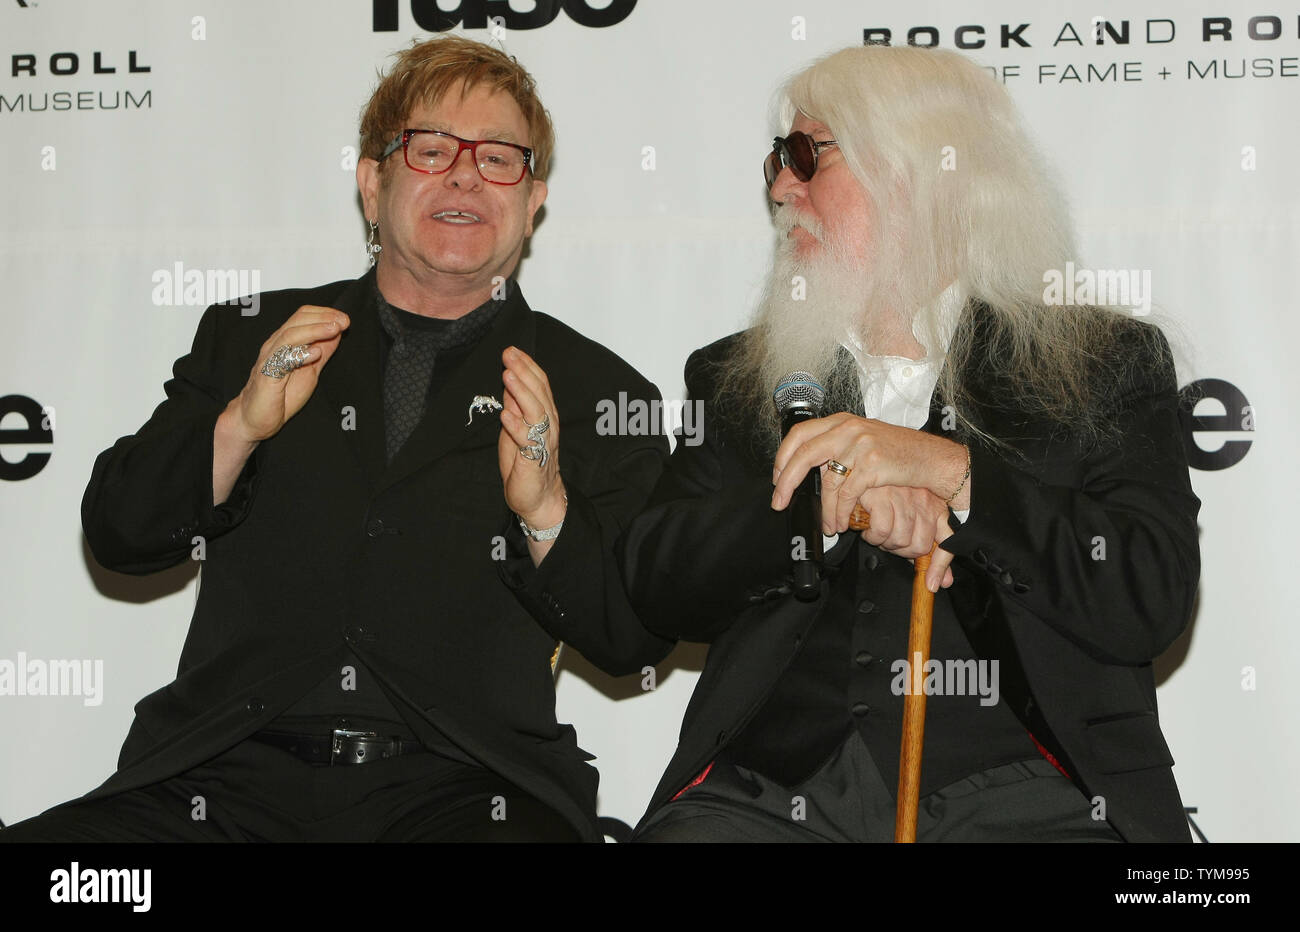 Elton John (L) answers reporters' questions as inductee Leon Russell at the Rock and Roll Hall of Fame induction ceremony held at the Waldorf-Astoria hotel in New York on March 14, 2011.      UPI Photo/Monika Graff... Stock Photo